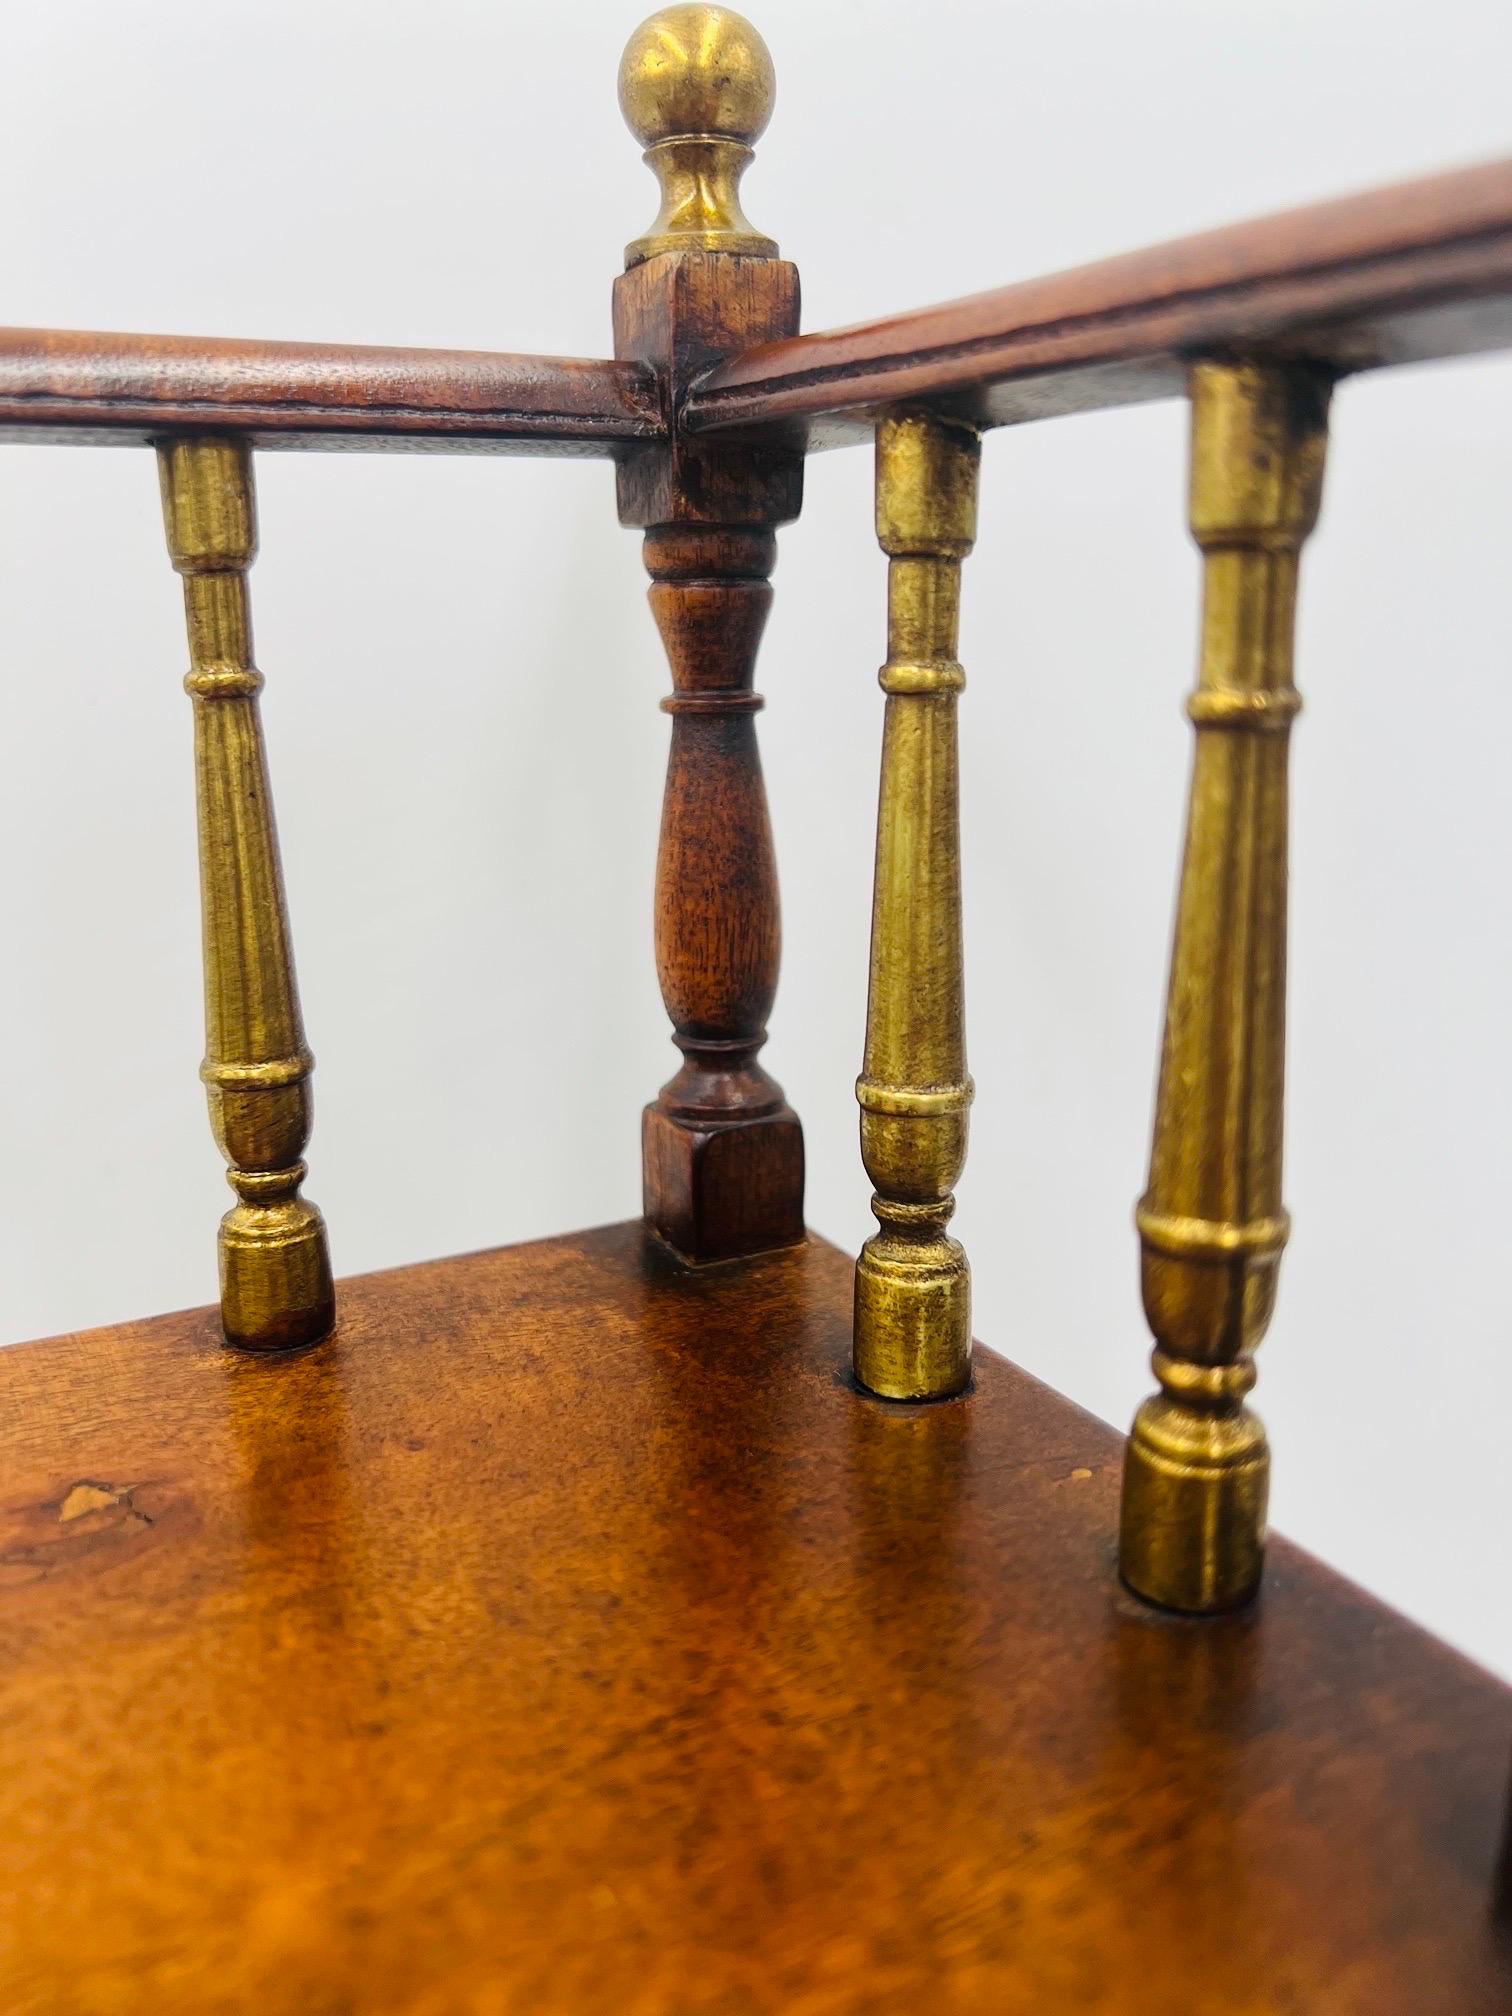 Antique Edwardian Mahogany Staircase Model with Brass Finial Newel Posts For Sale 10